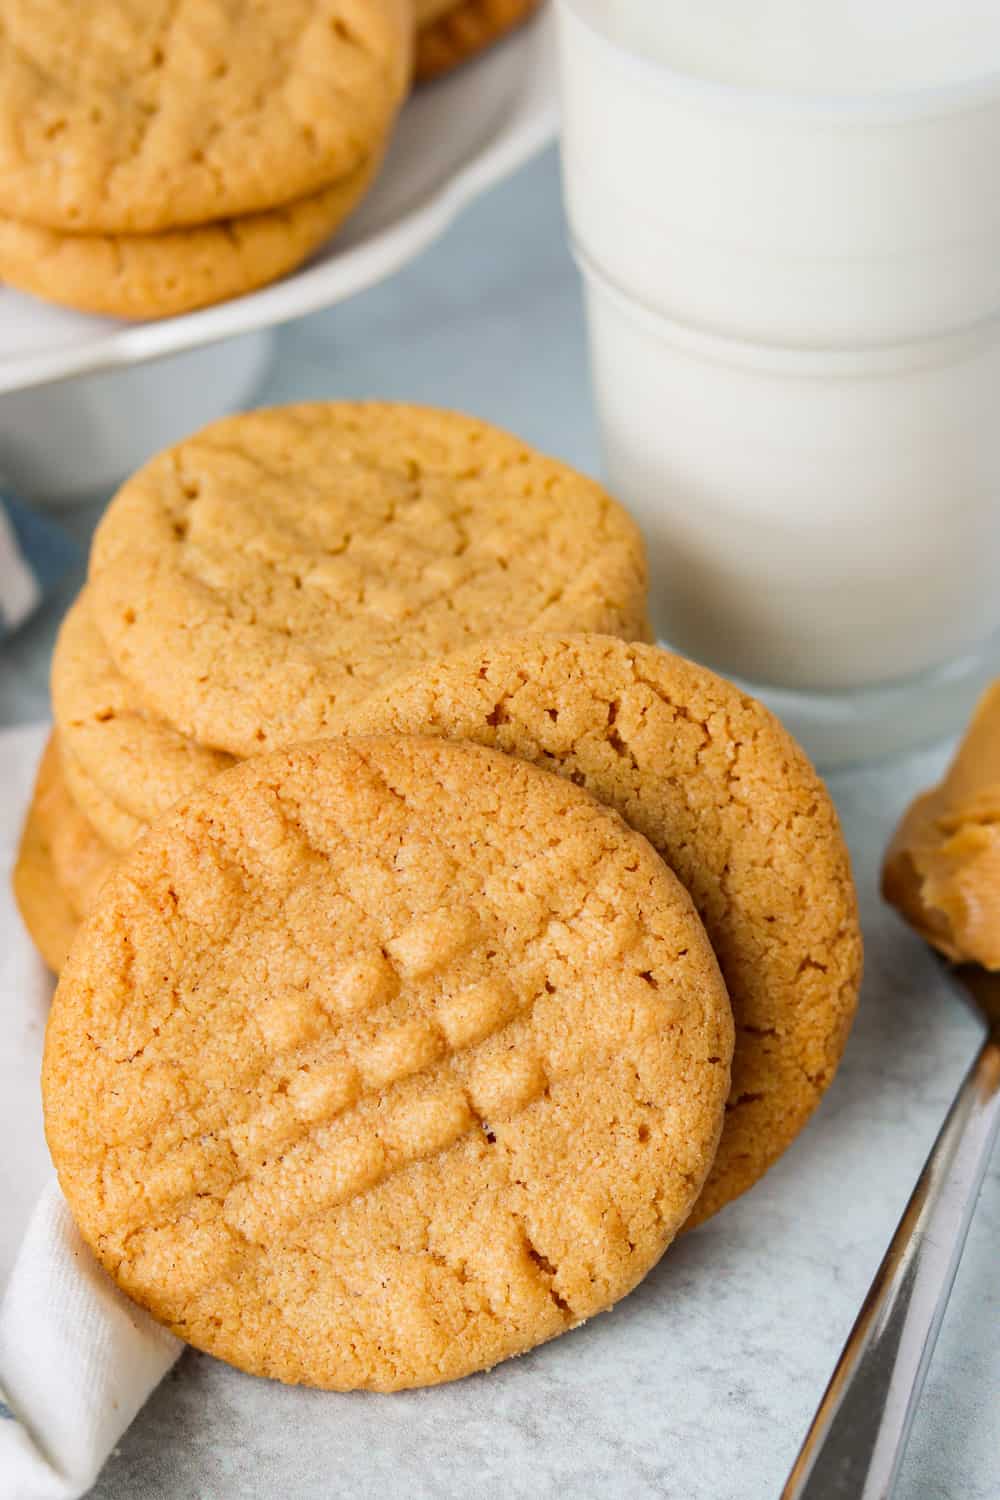 3 Ingredient Peanut Butter Cookies – Ready in Just 13 Minutes!